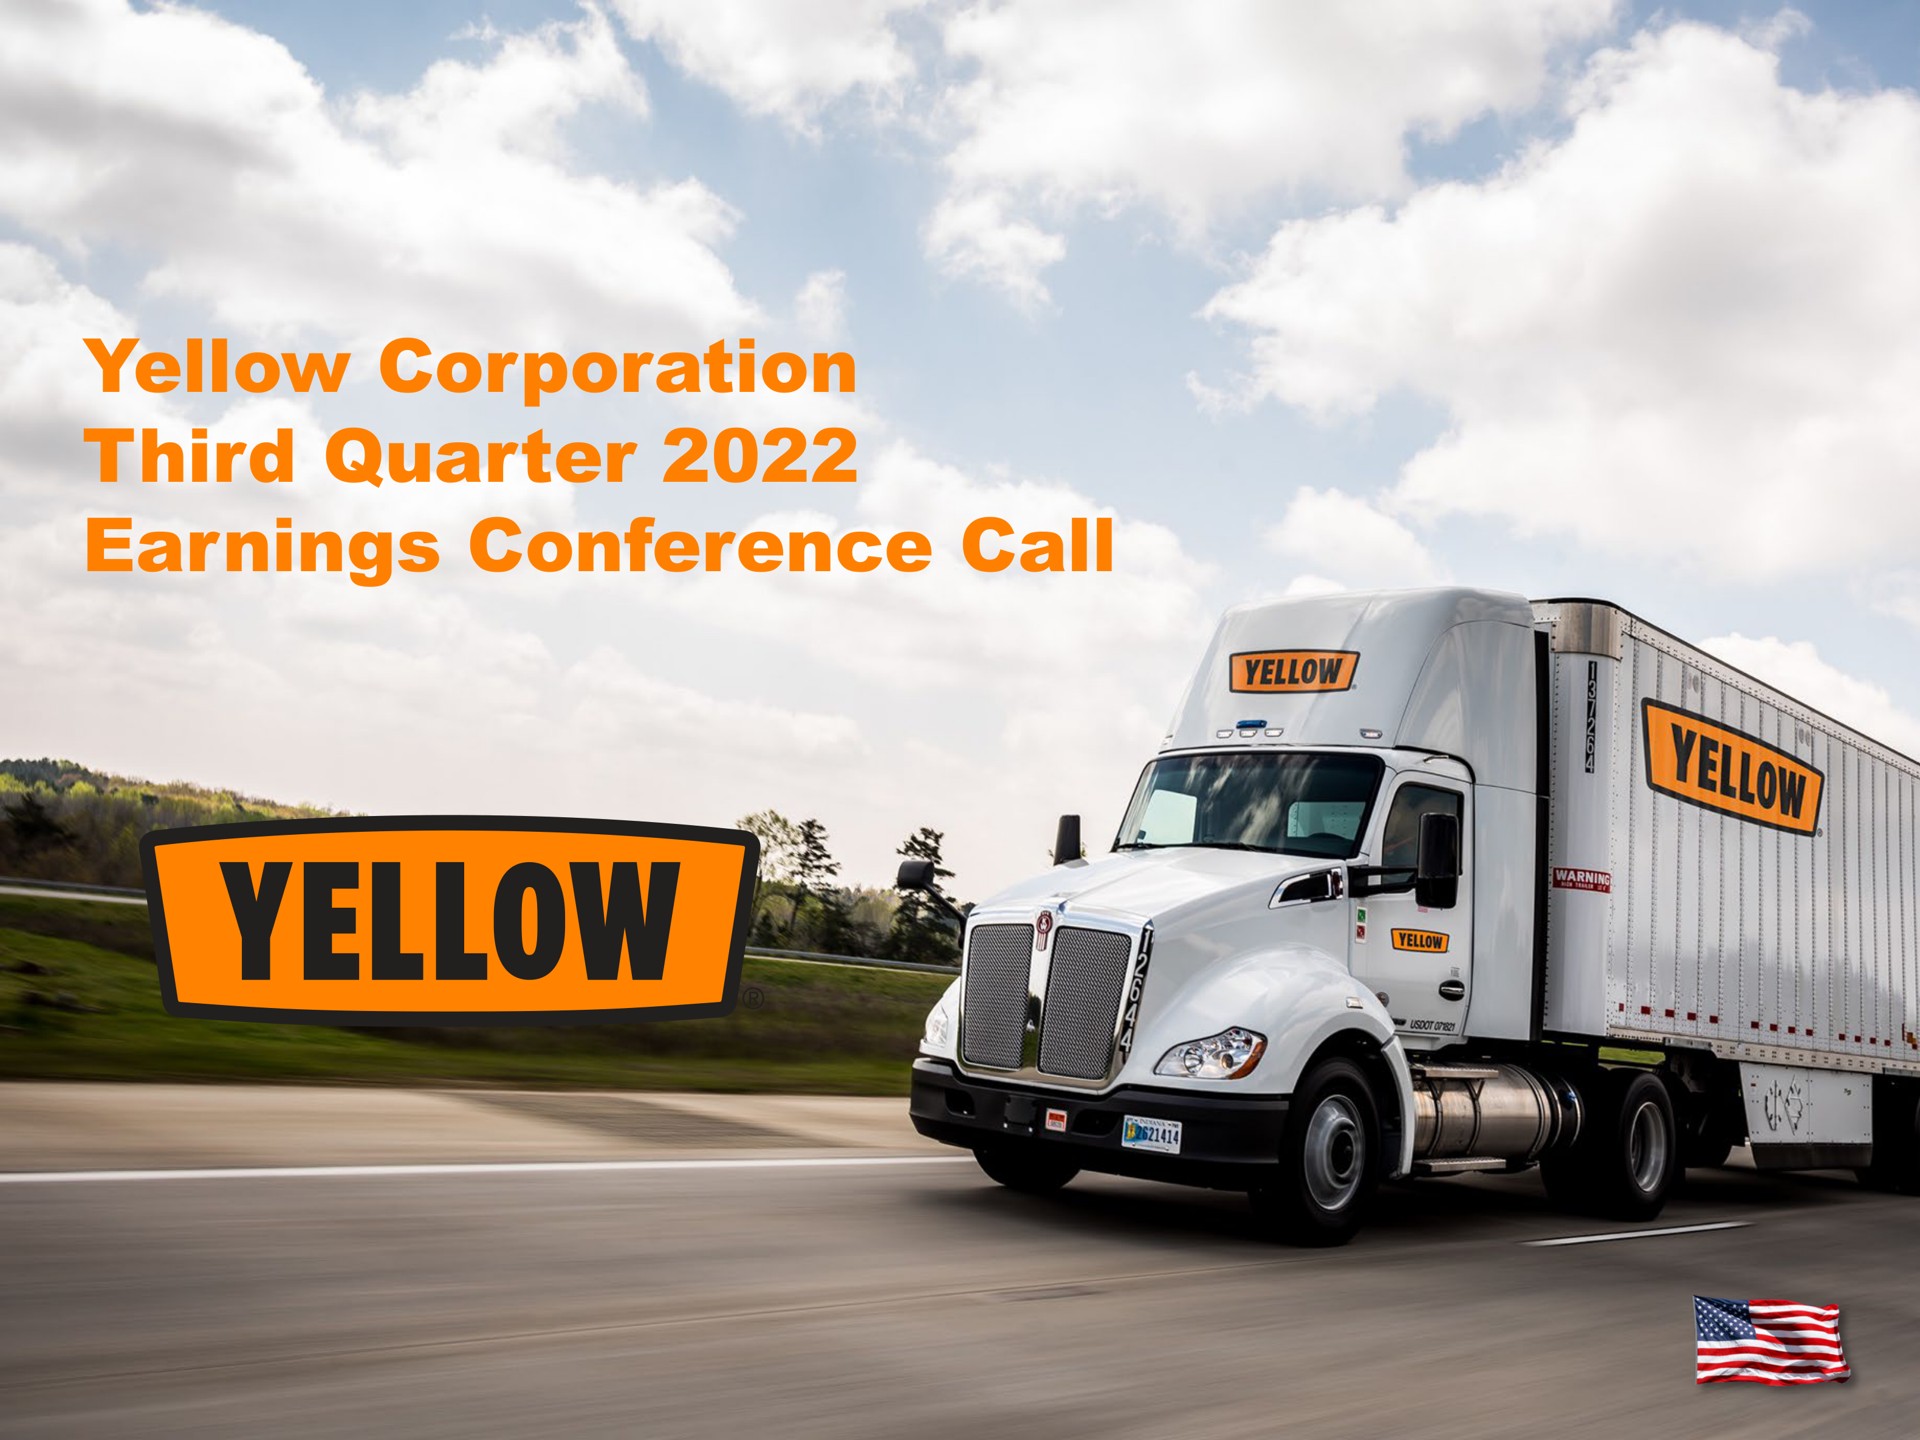 yellow corporation third quarter earnings conference call | Yellow Corporation